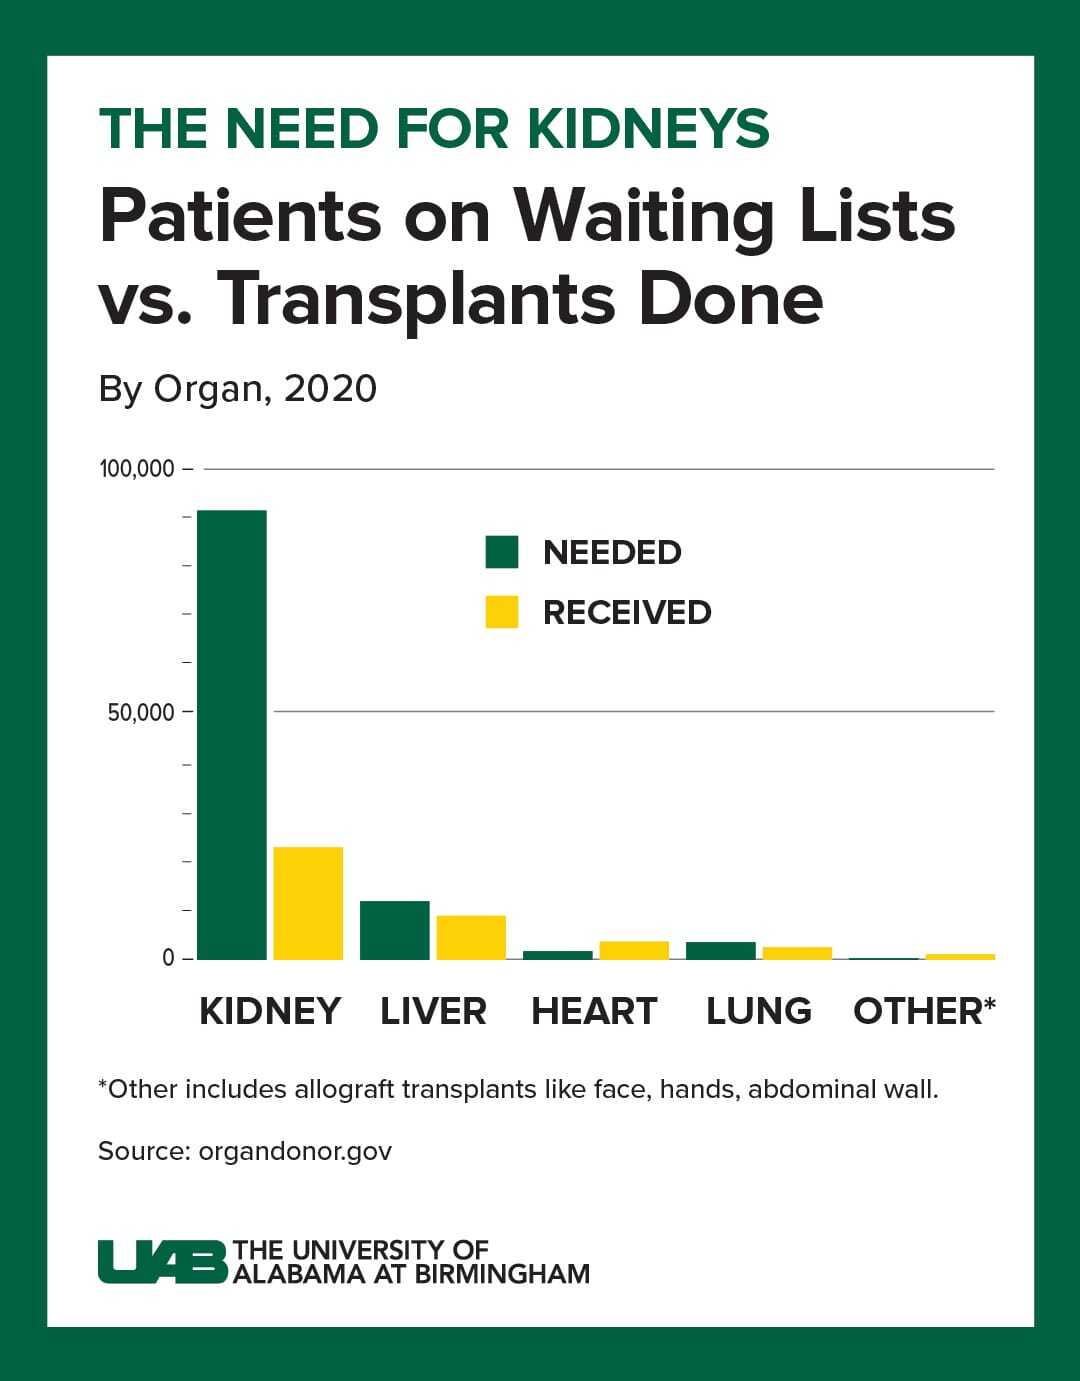 The need for kidneys: Patients on waiting lists vs. transplants done